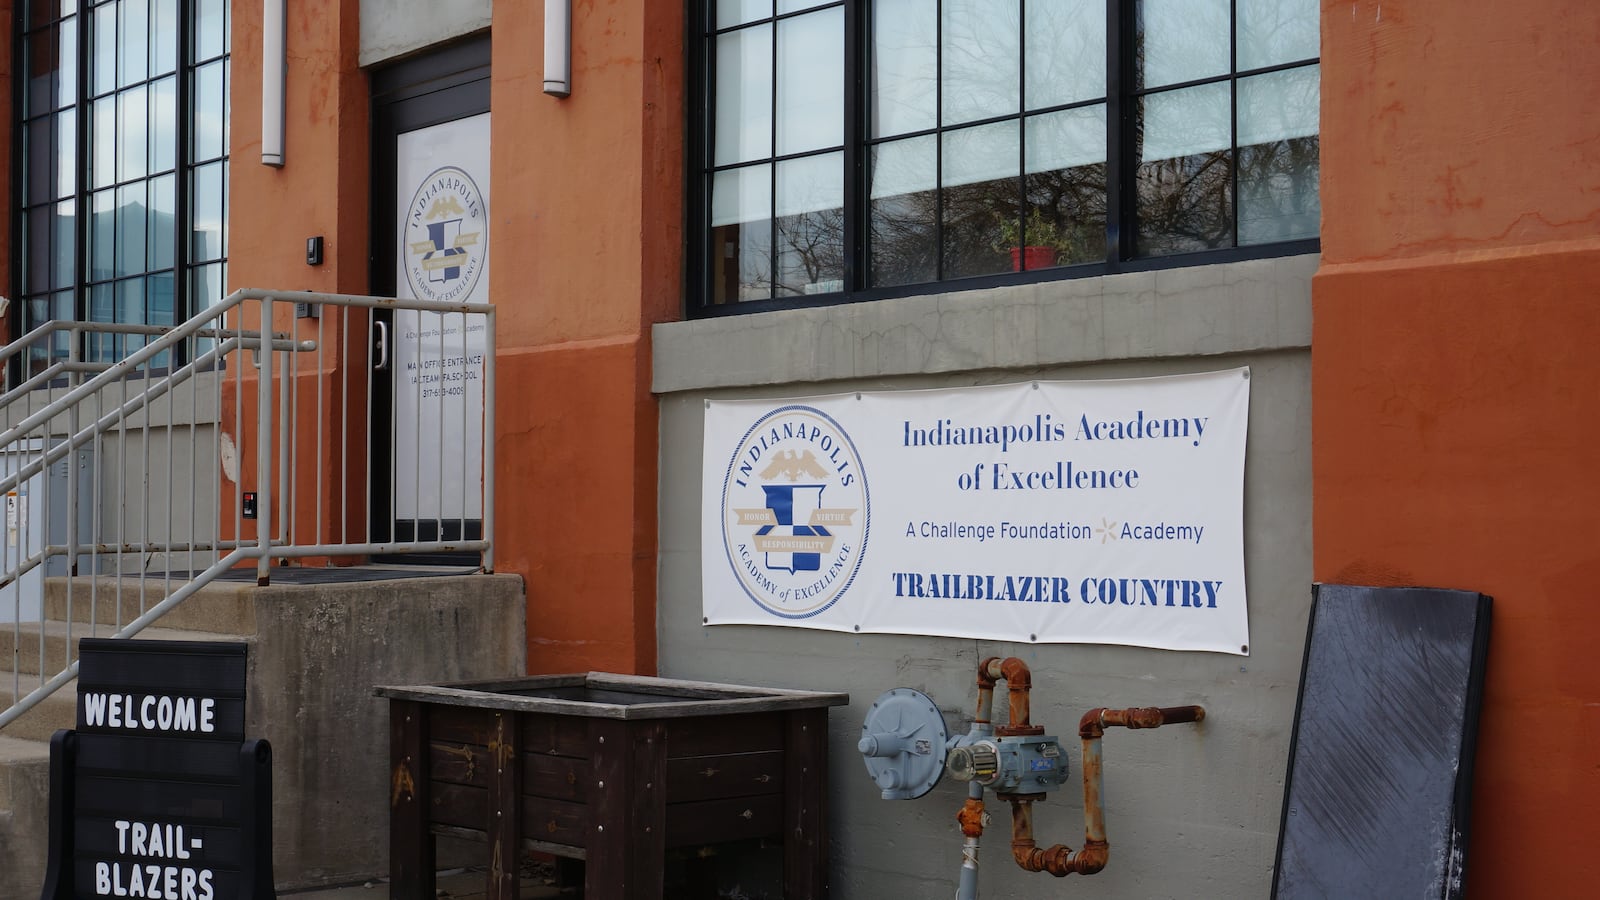 Indianapolis Academy of Excellence